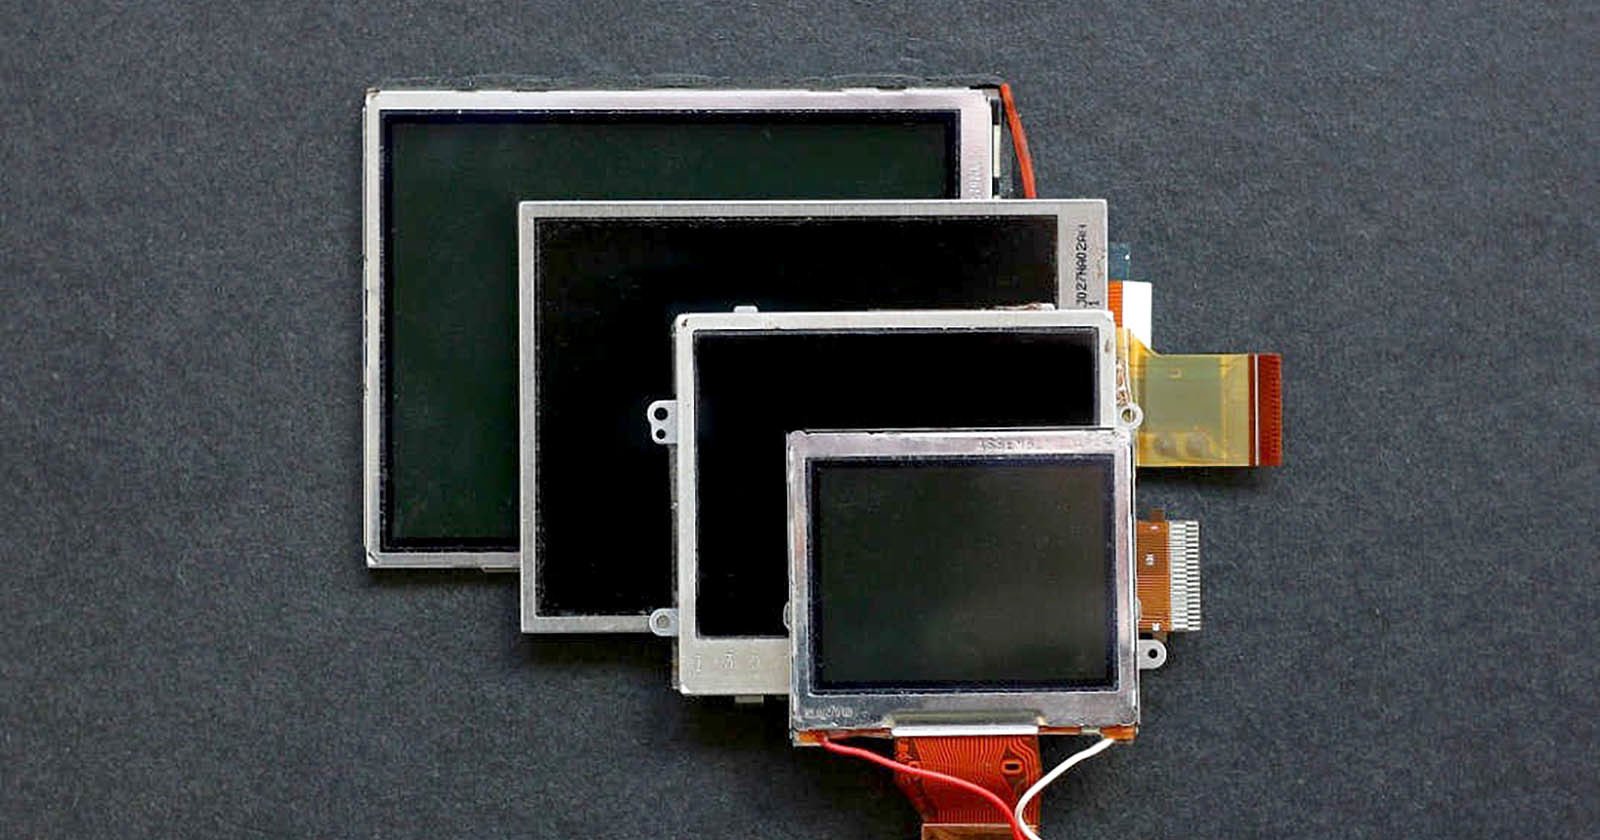 Digital Cameras Were Stuck on Small Screens for Far Too Long